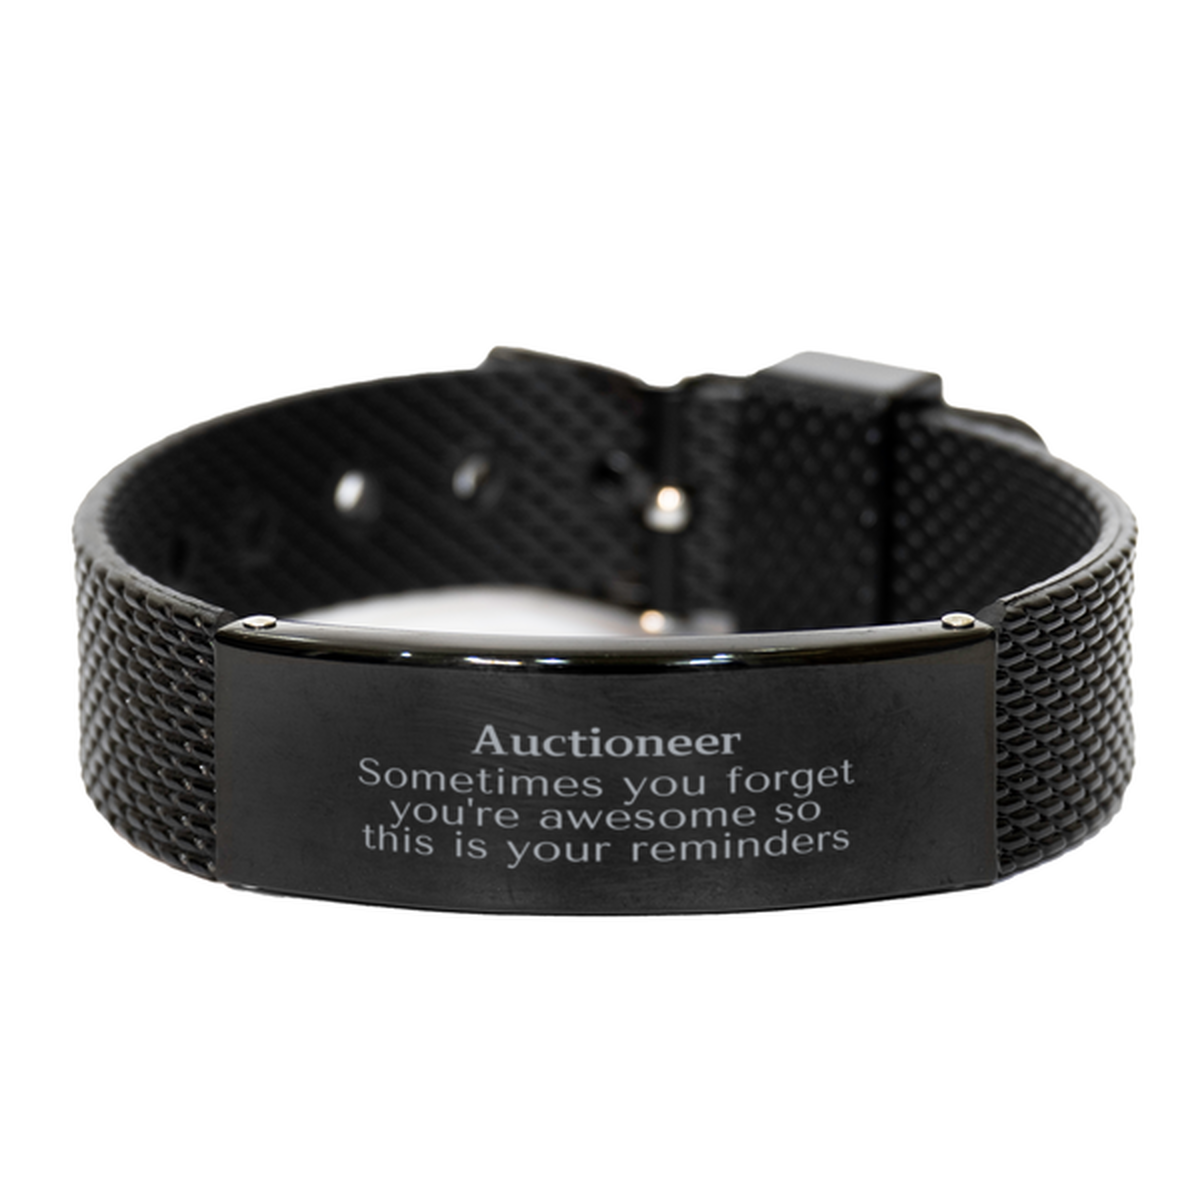 Sentimental Auctioneer Black Shark Mesh Bracelet, Auctioneer Sometimes you forget you're awesome so this is your reminders, Graduation Christmas Birthday Gifts for Auctioneer, Men, Women, Coworkers